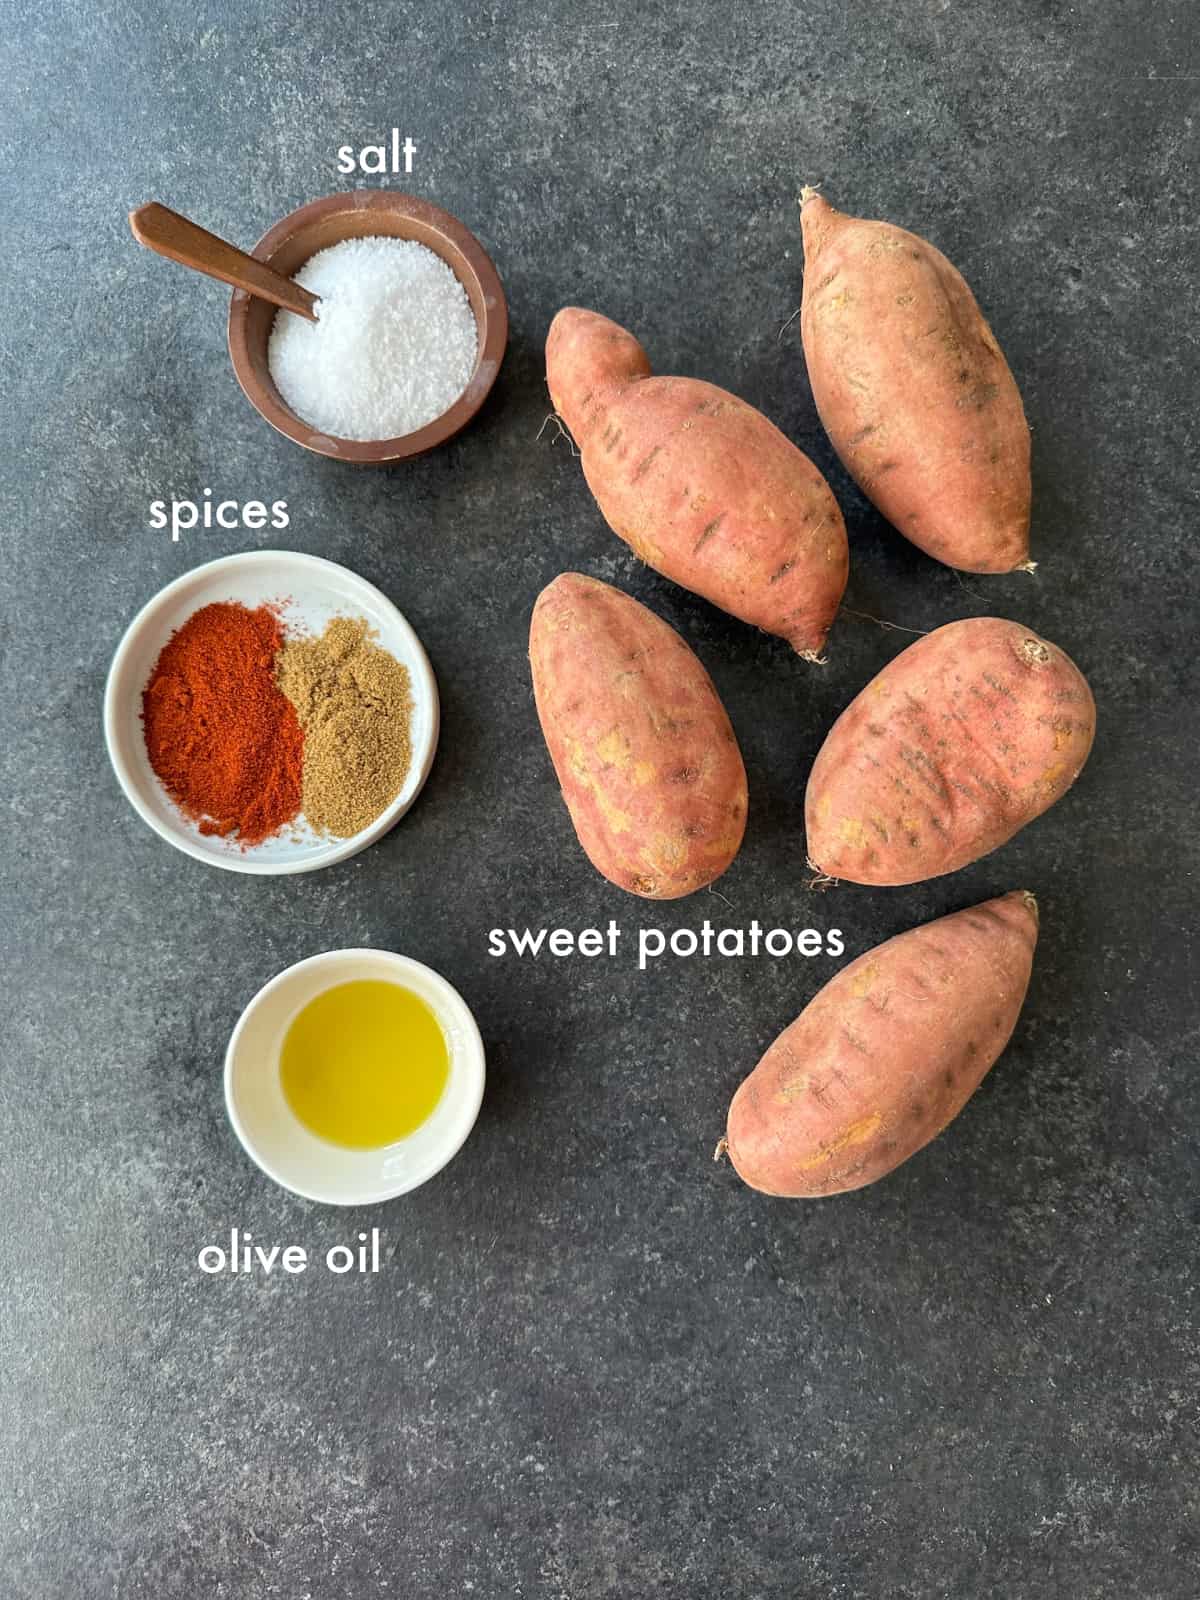 To make this recipe you need sweet potatoes, spices, olive oil and salt. 